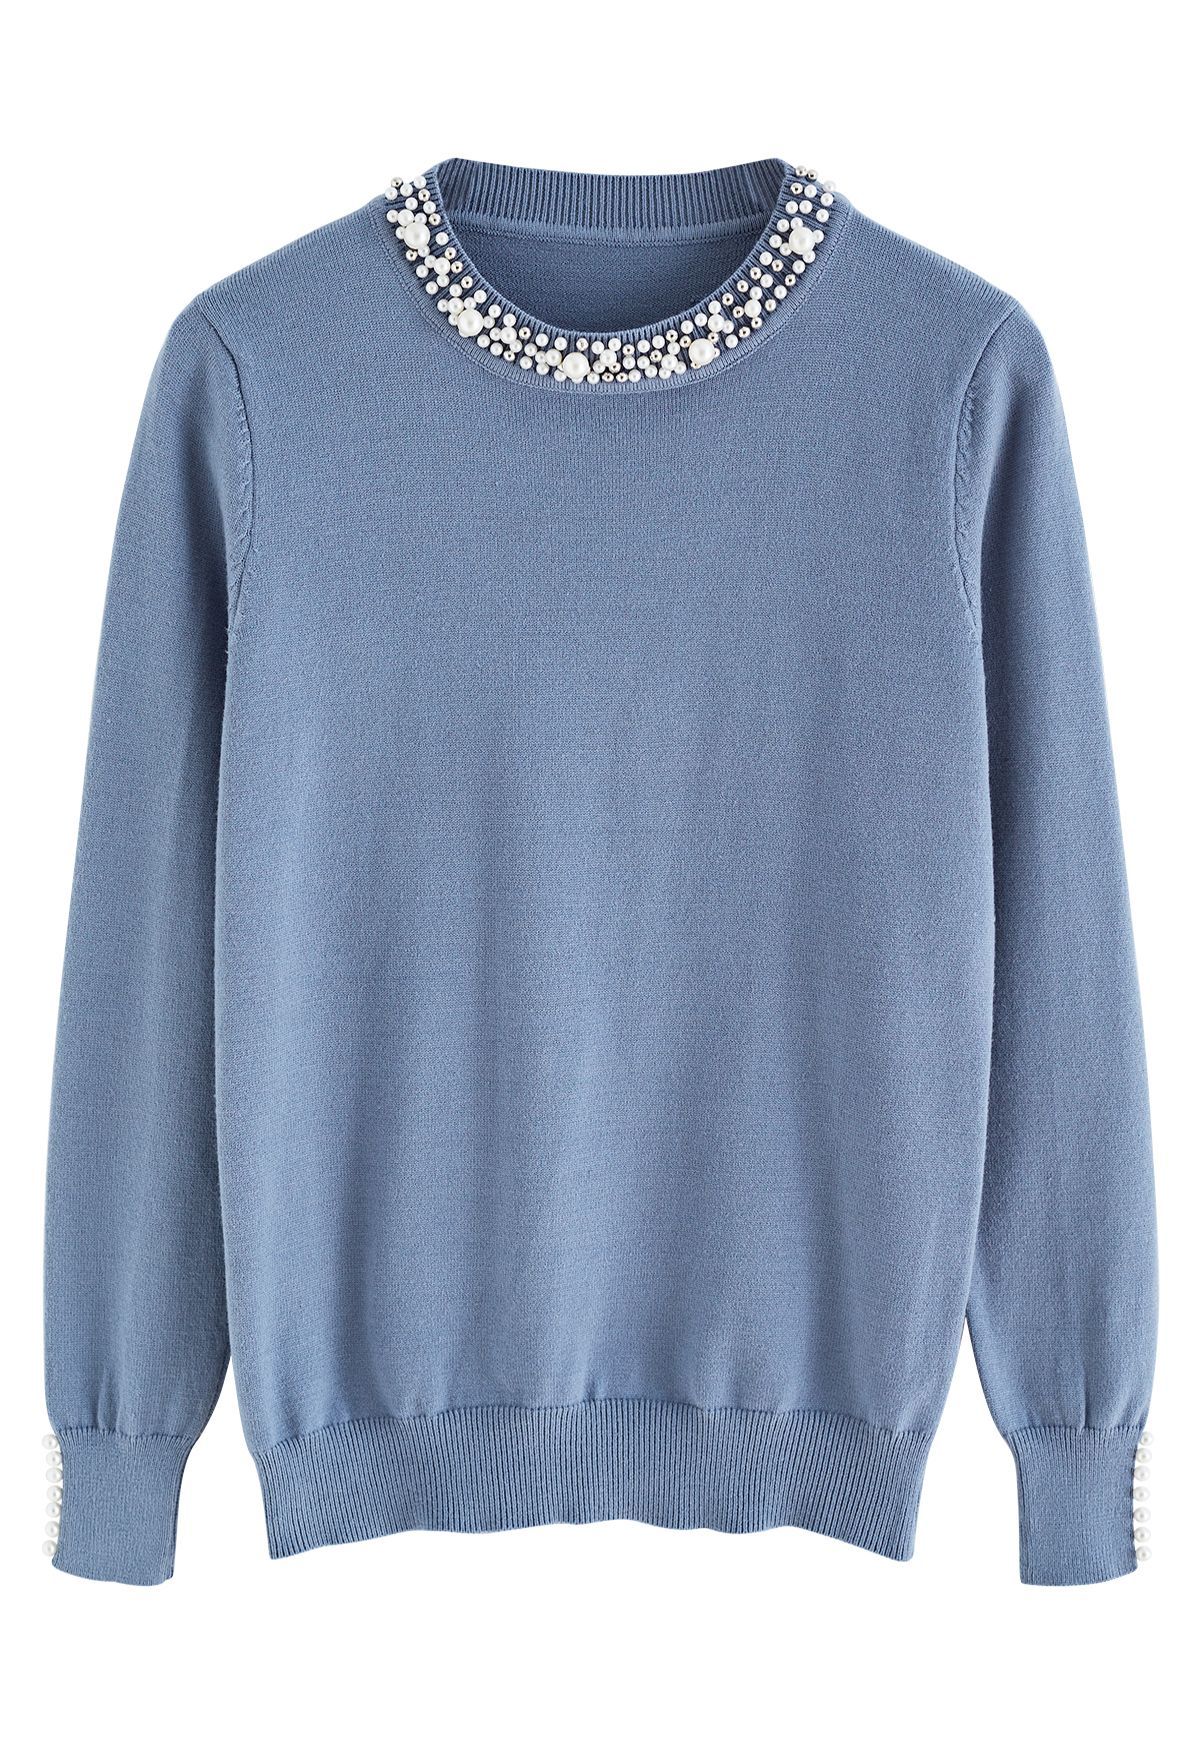 Pearl Trimmed Soft Knit Top in Dusty Blue | Chicwish